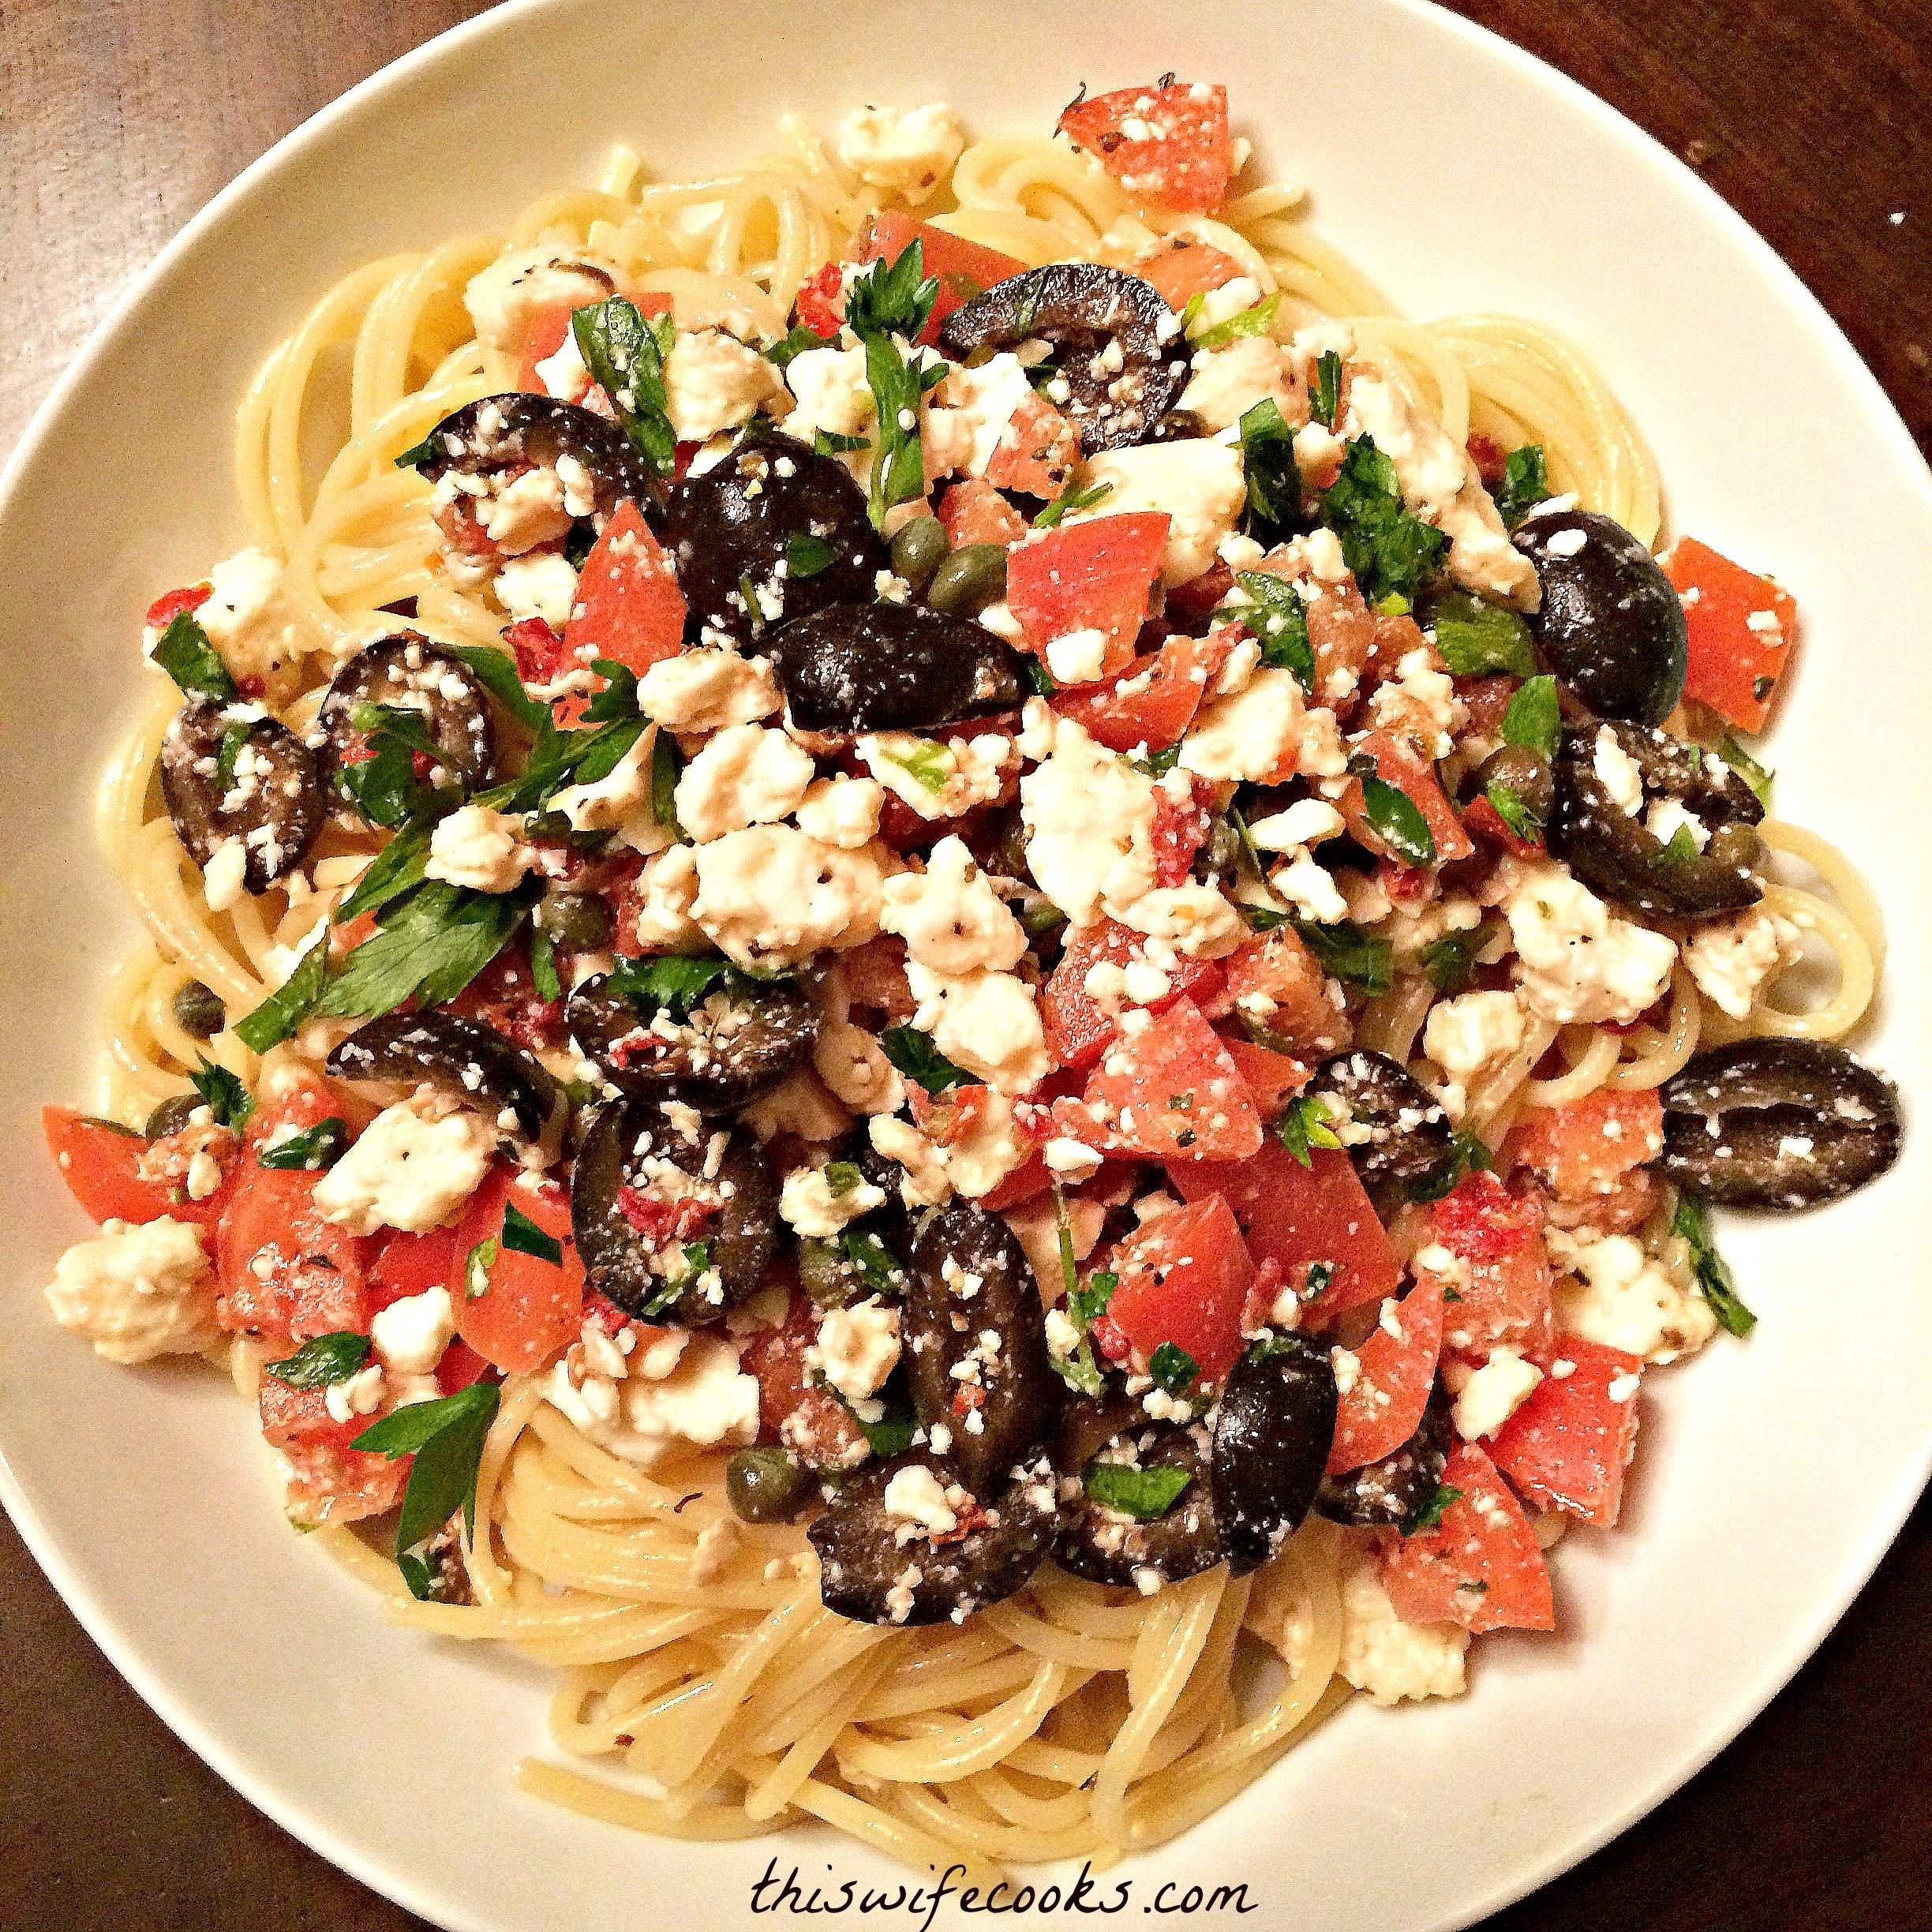 Vegan Mediterranean Pasta - A tasty Mediterranean-inspired dish with black olives, tomatoes, capers, and vegan feta.  via @thiswifecooks